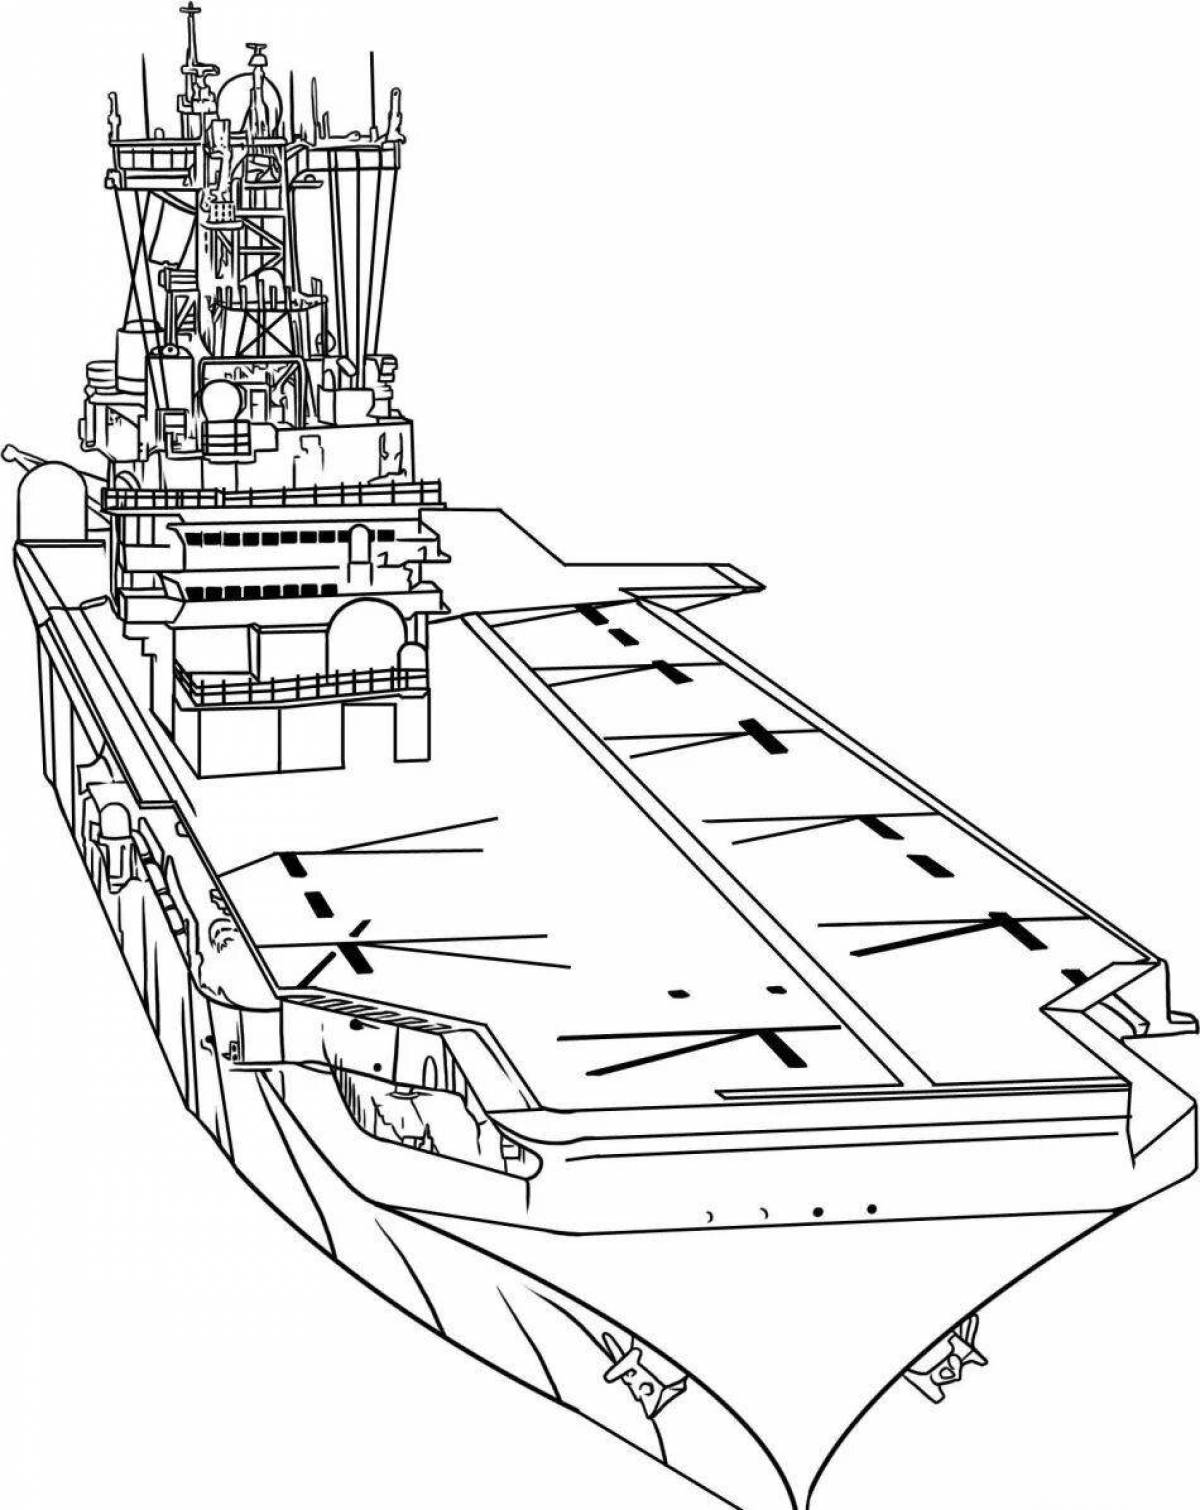 Colourful aircraft carrier coloring page